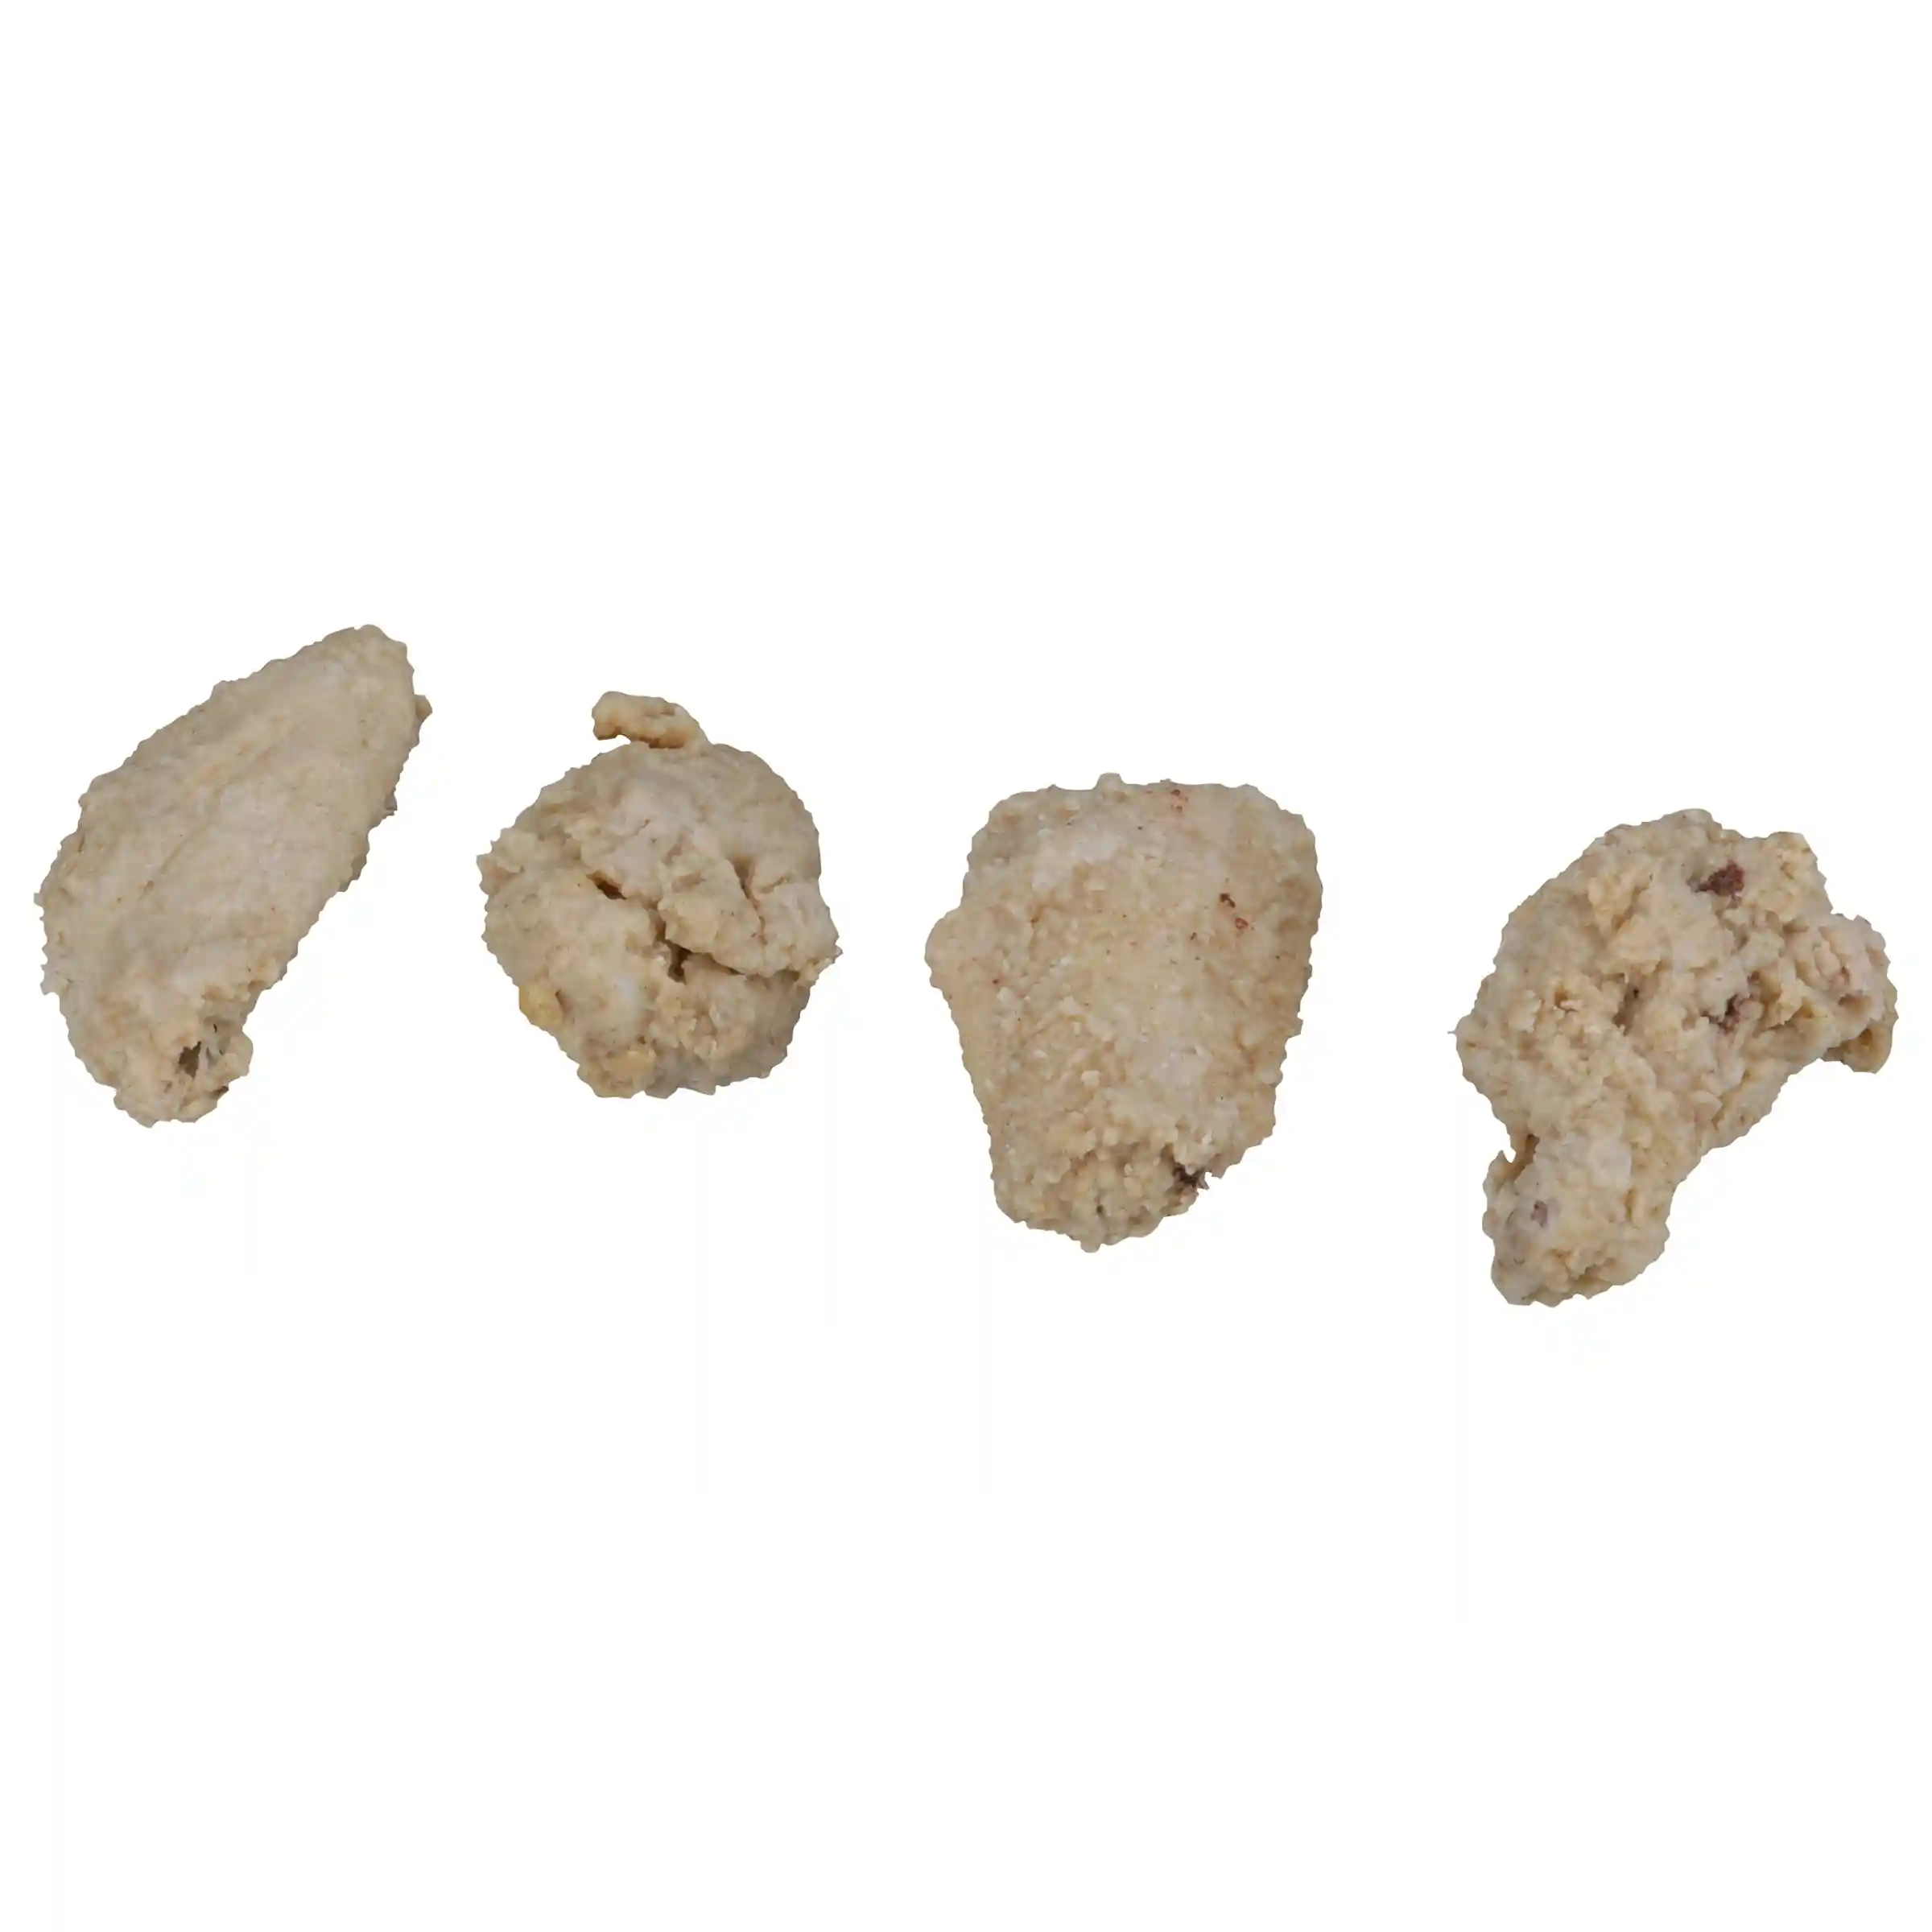 Tyson® Wing Stingers® Fully Cooked Breaded Bone-In Chicken Wing Sections, Jumbo_image_11